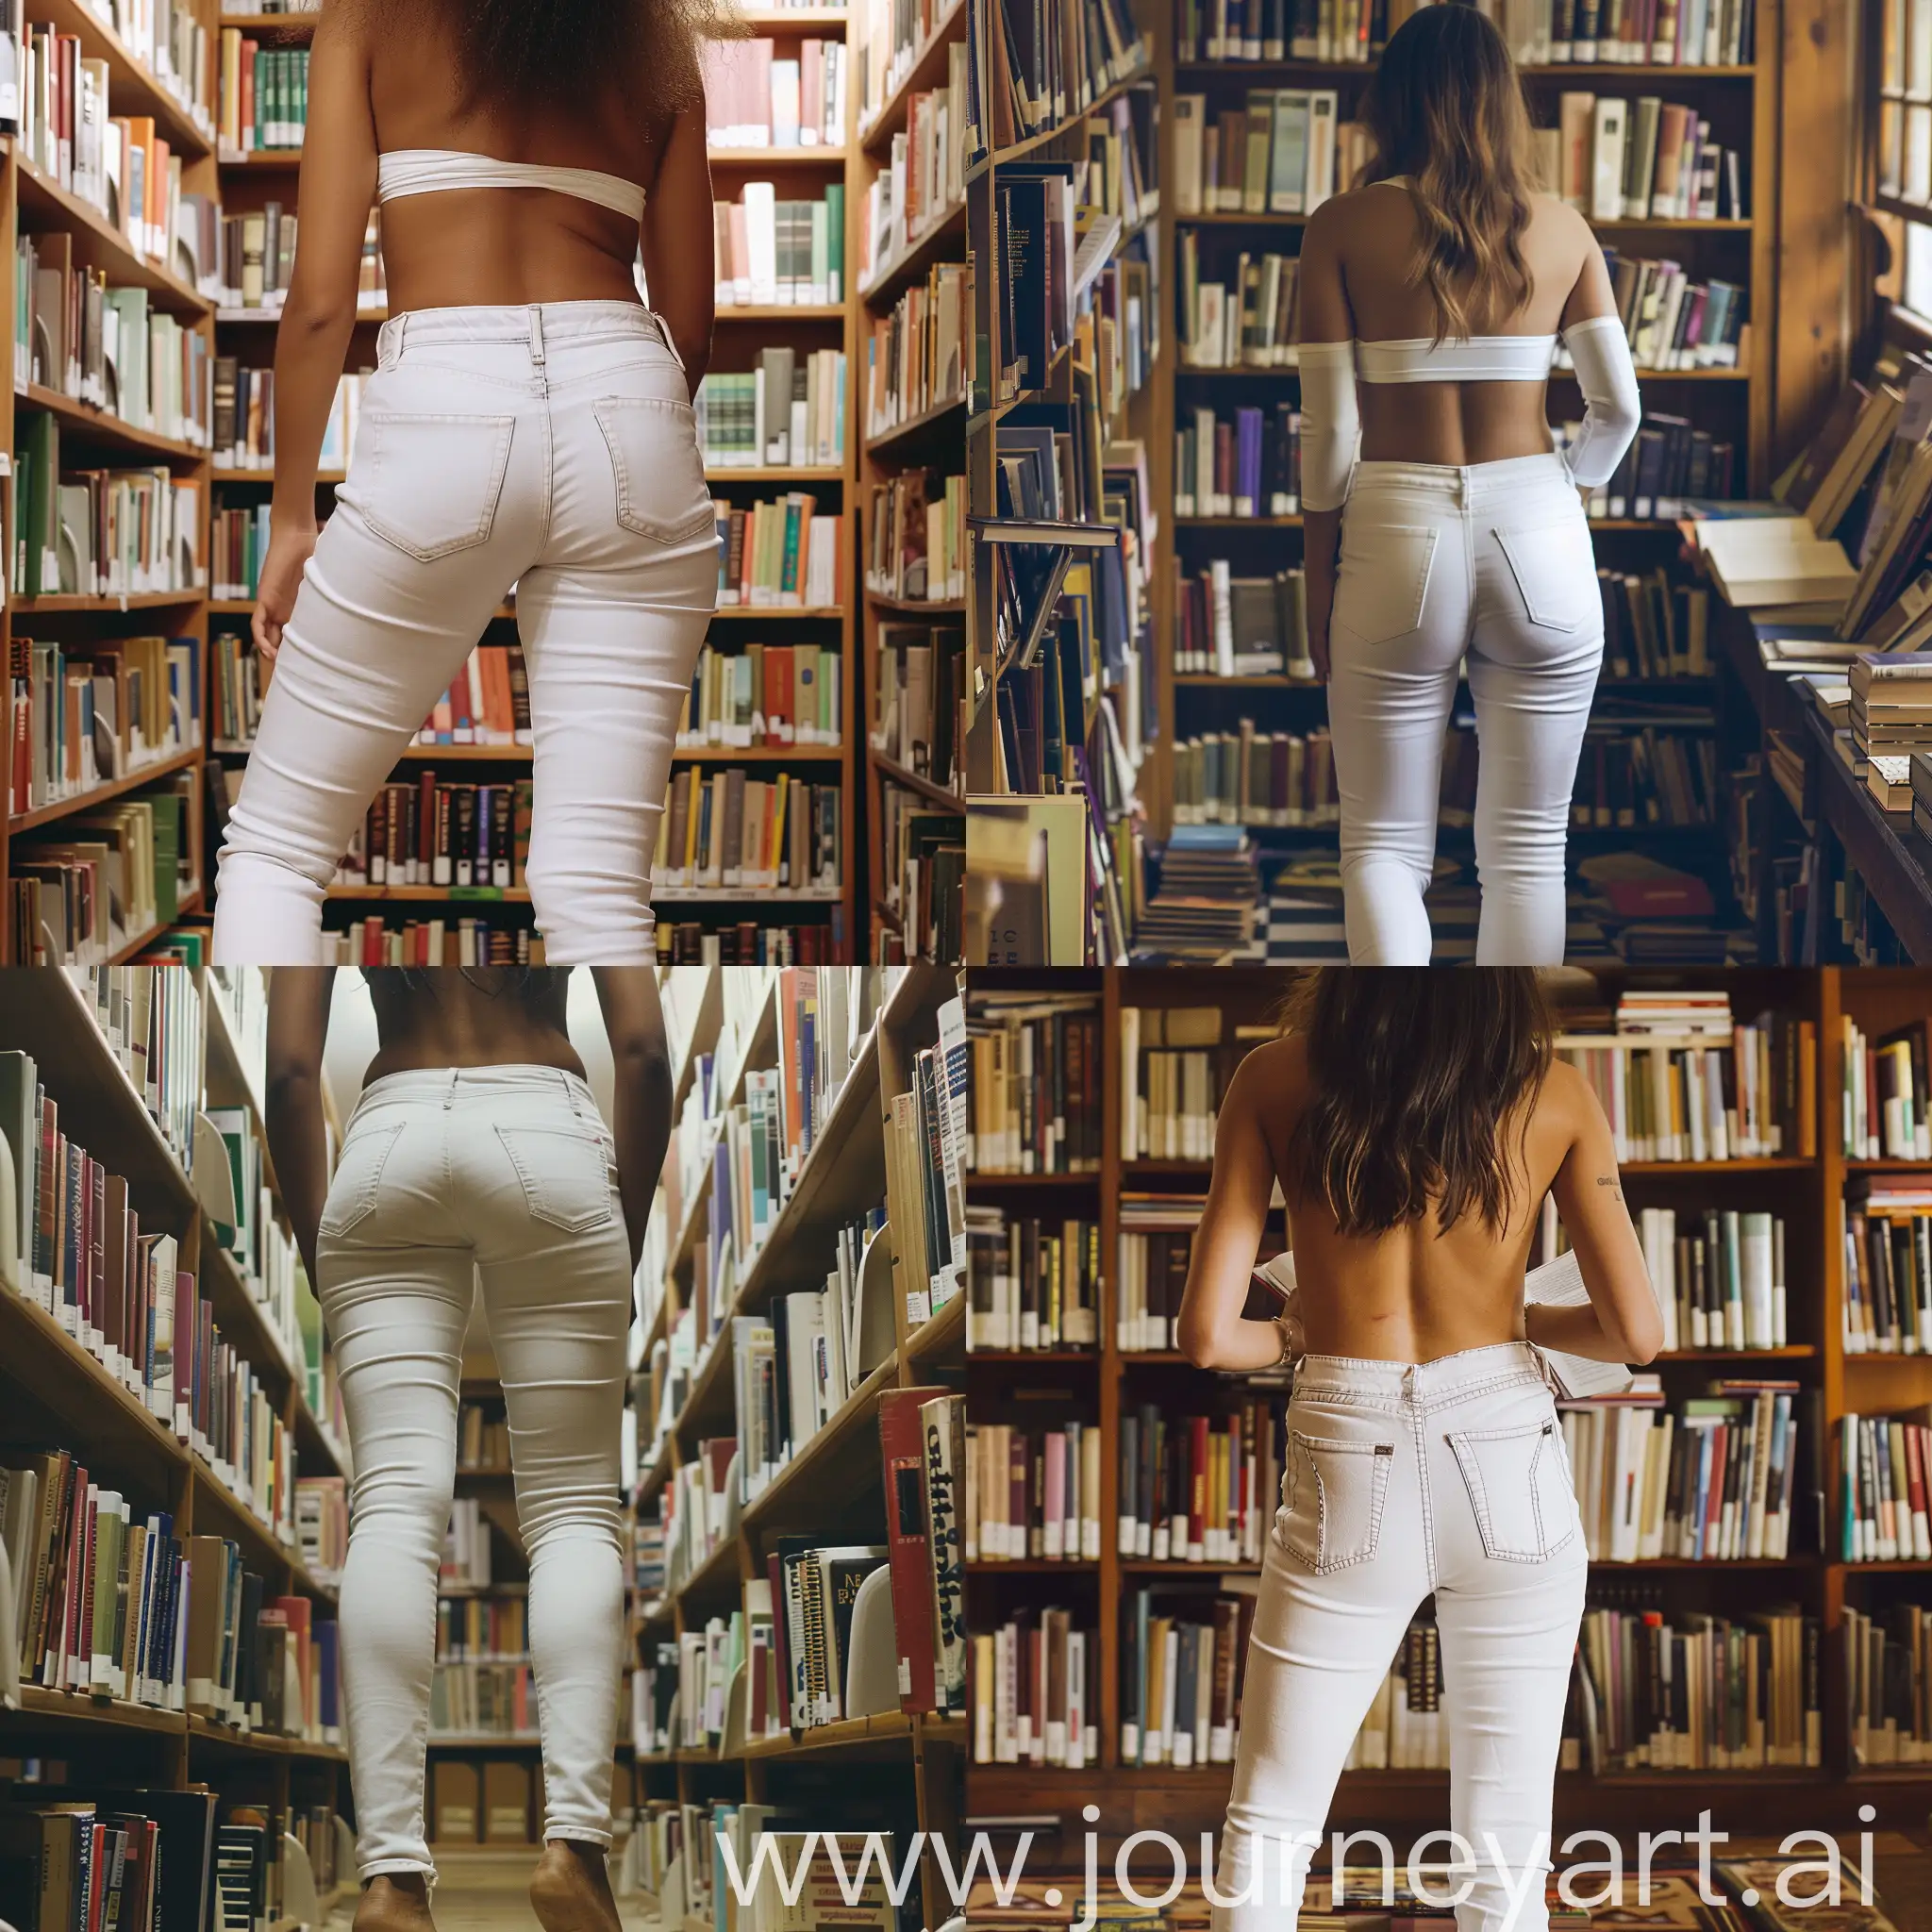 Woman-in-White-Jeans-Browsing-Books-in-Library